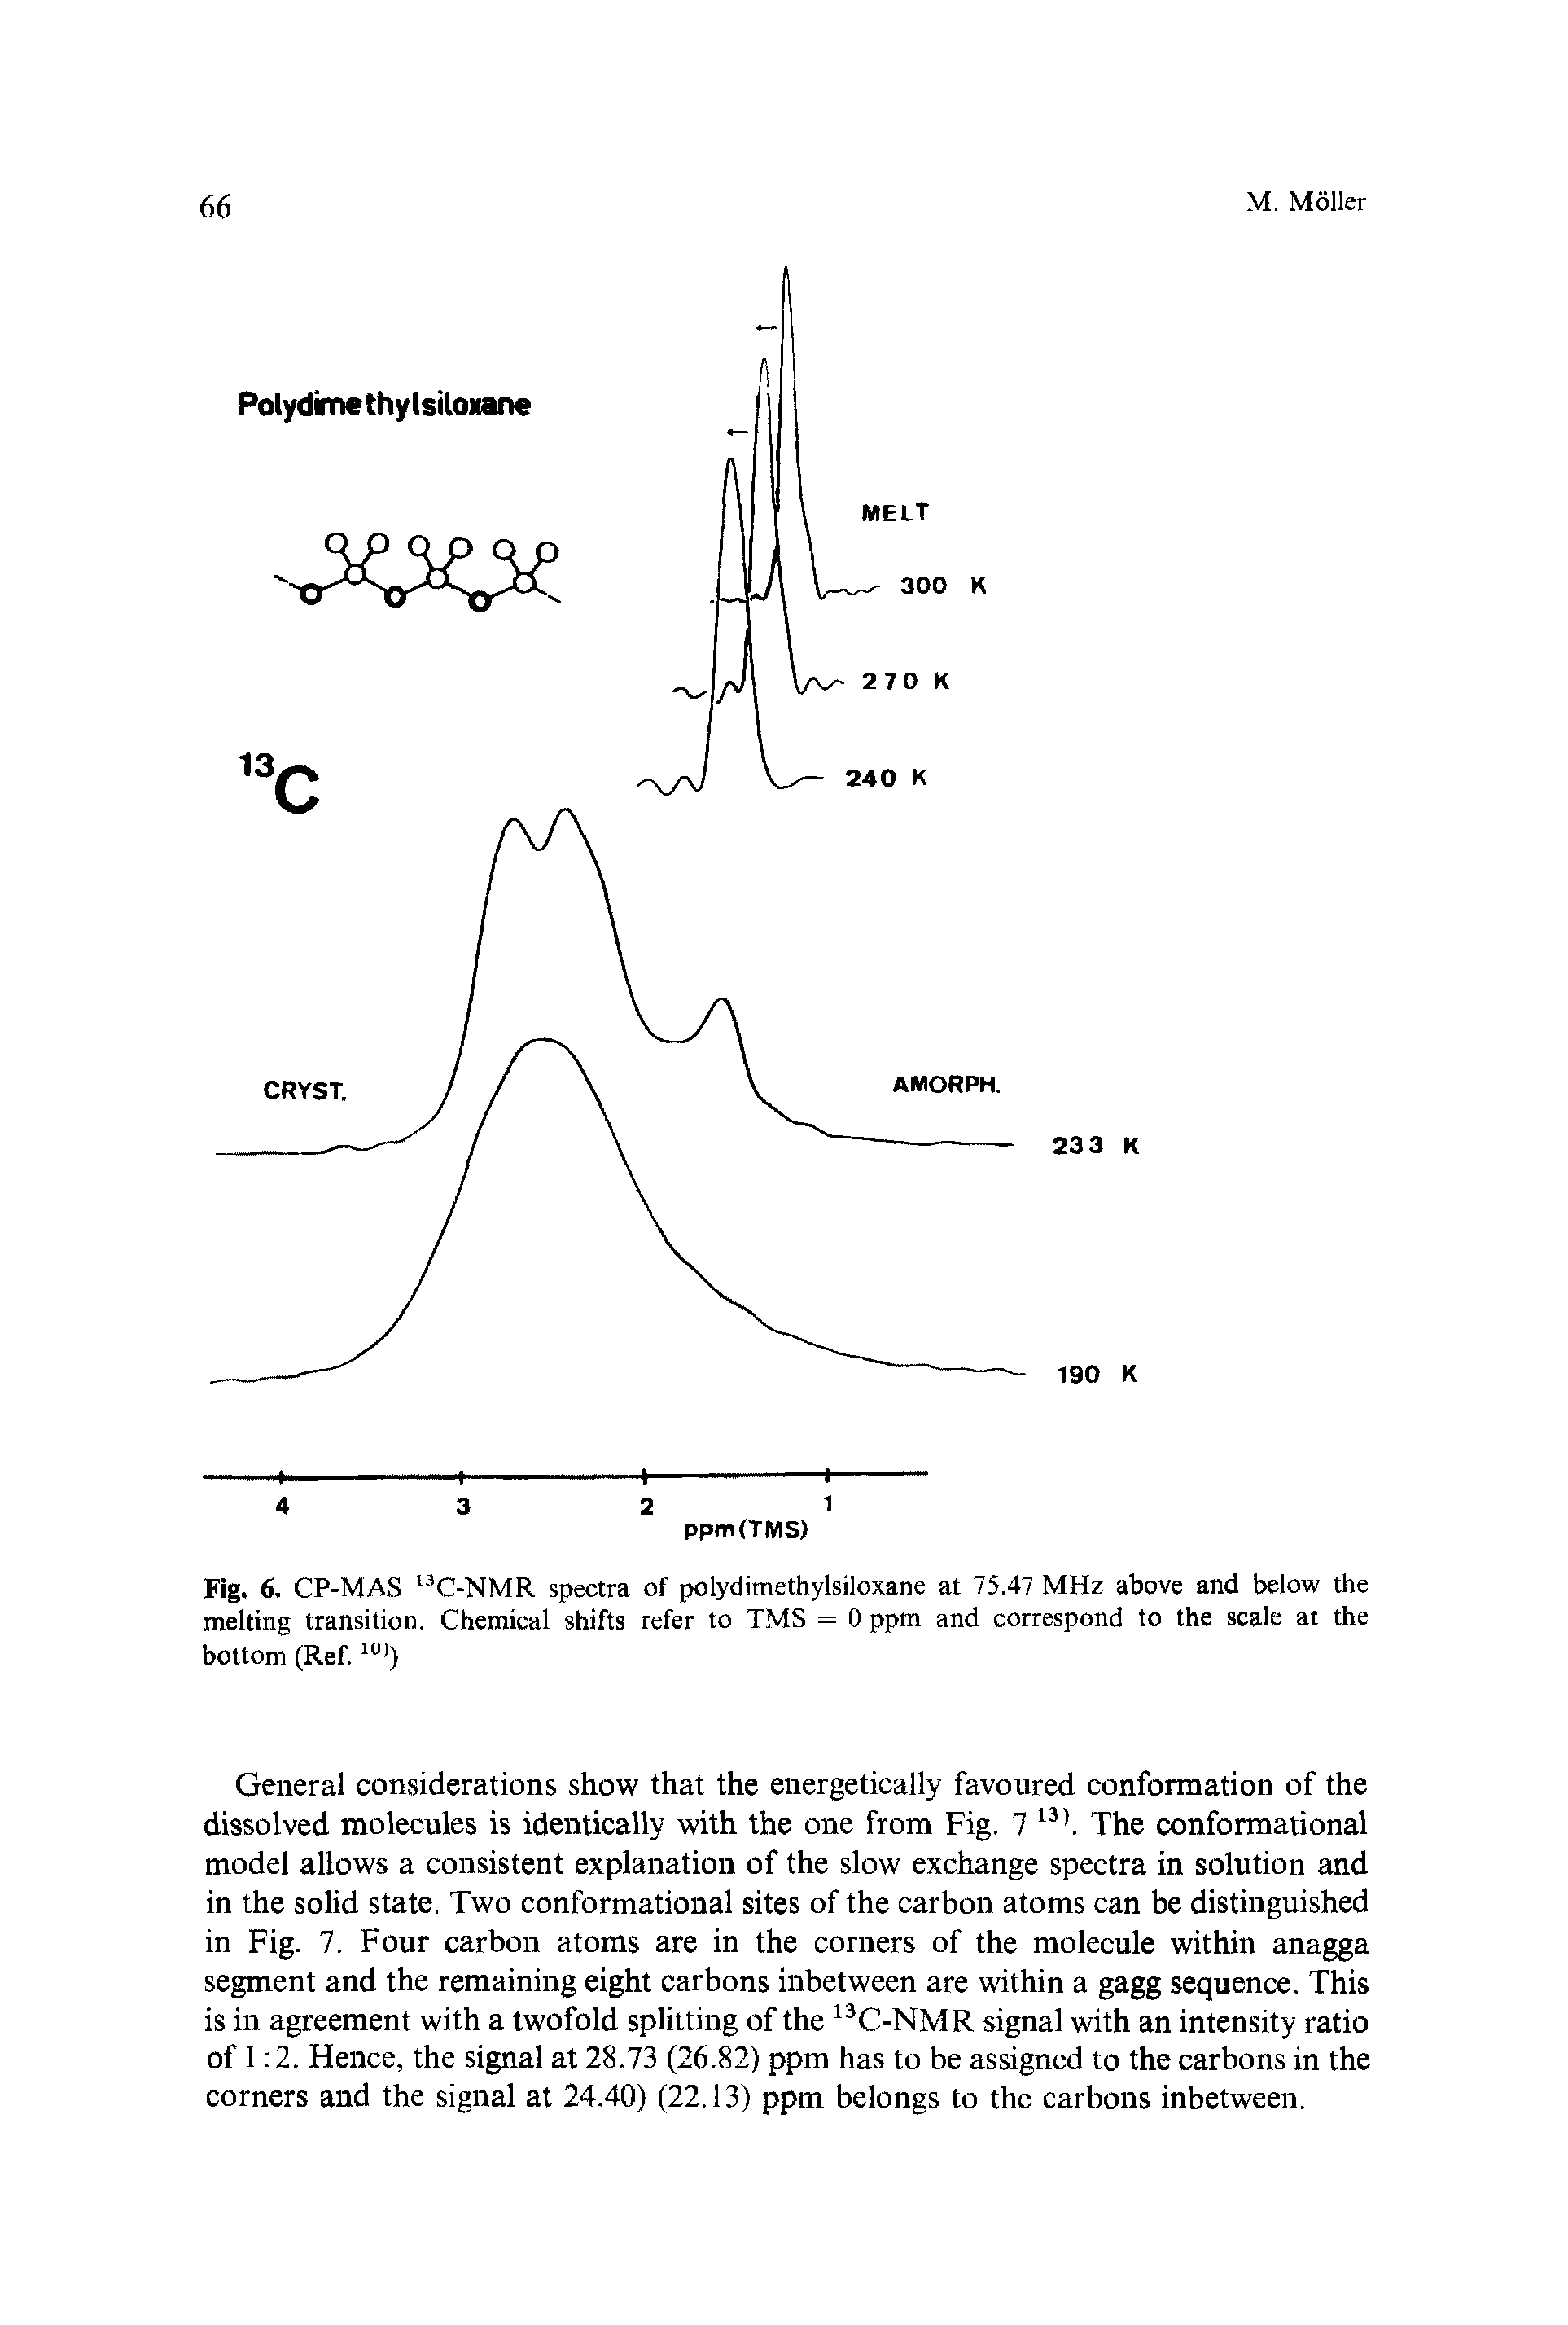 Fig. 6. CP-MAS l3C-NMR spectra of polydimethylsiloxane at 75.47 MHz above and below the melting transition. Chemical shifts refer to TMS = 0 ppm and correspond to the scale at the bottom (Ref.10))...